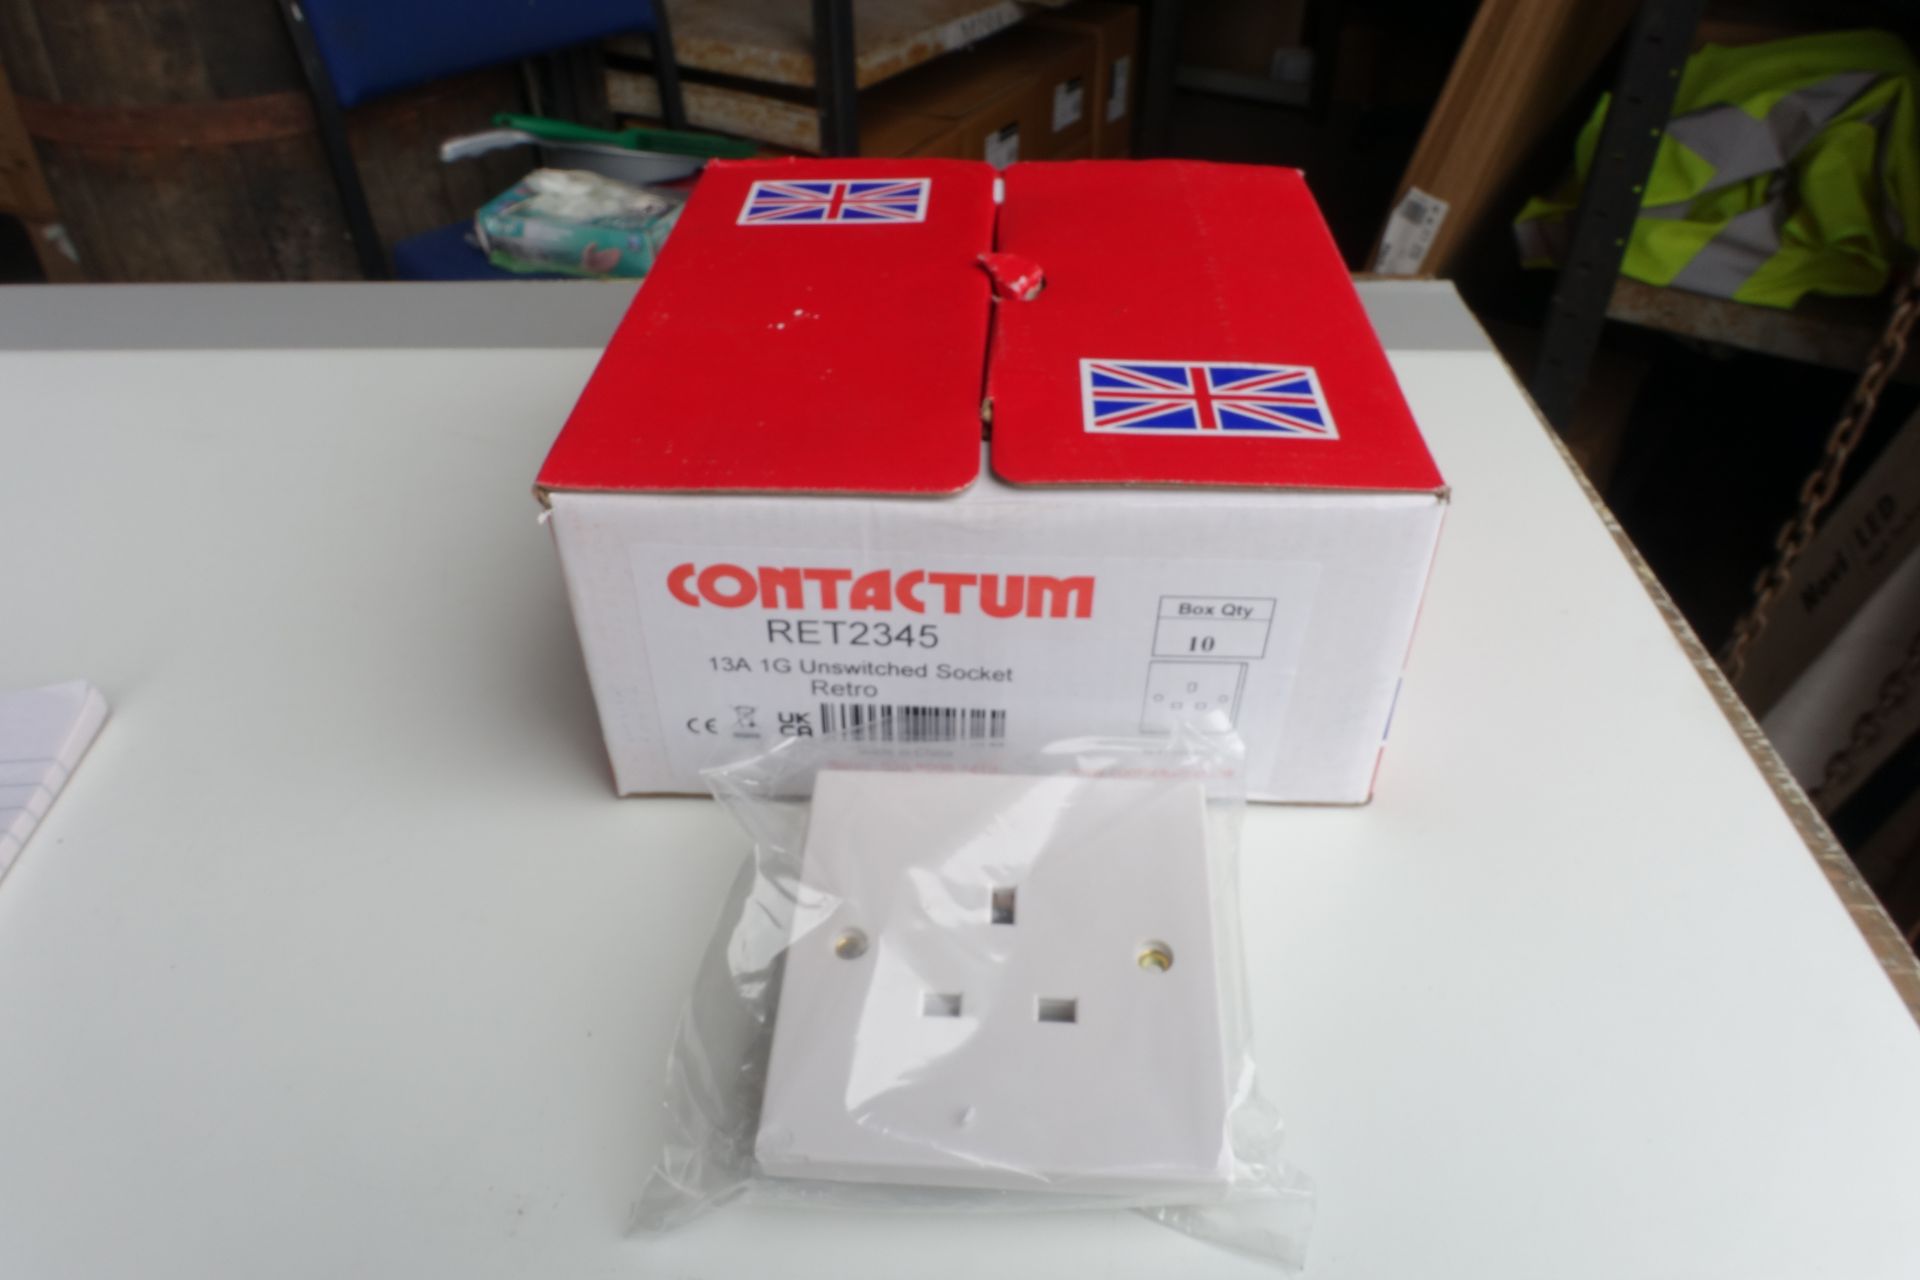 200 x CONTACTUM RET2345 13A 1G Unswitched Socket